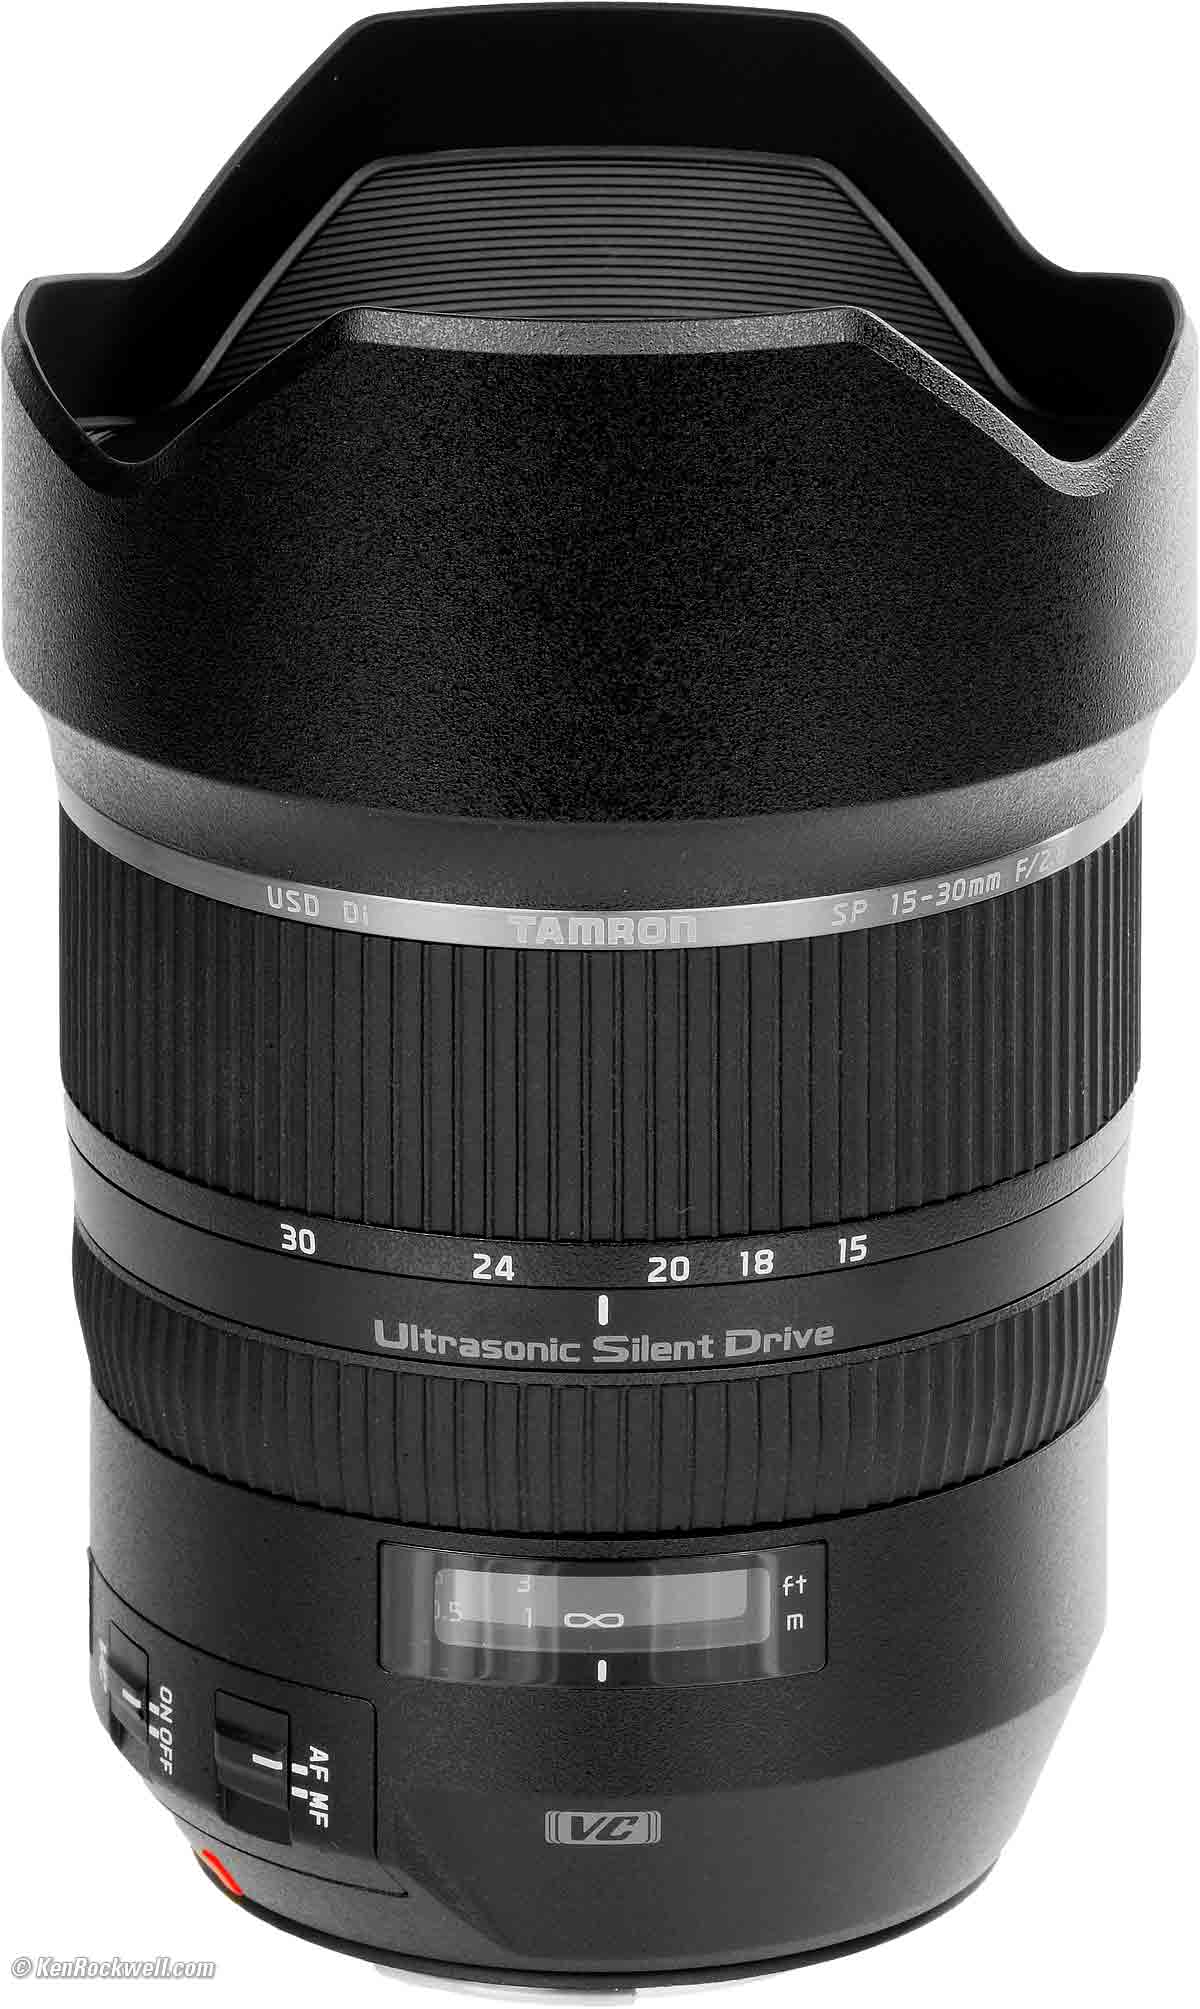 Tamron 15-30mm Review